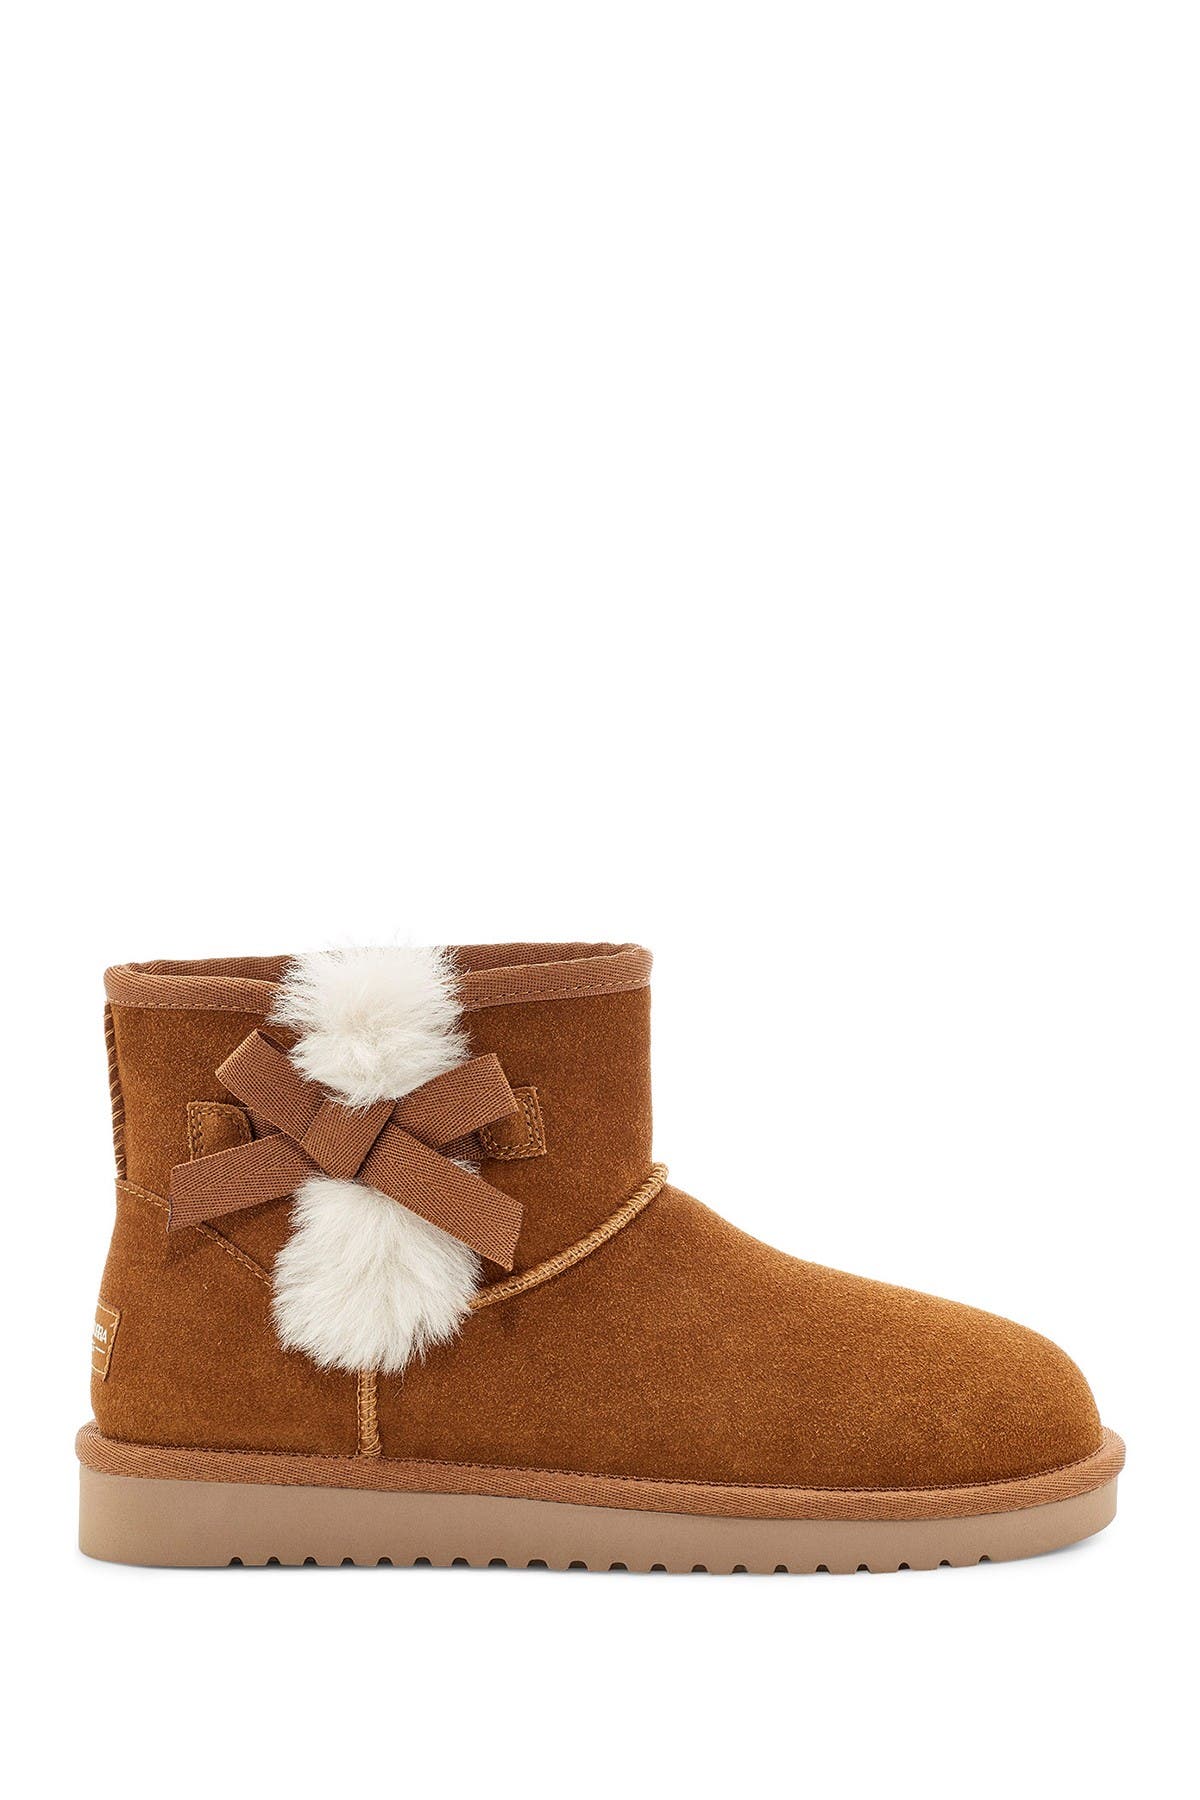 uggs with fur trim